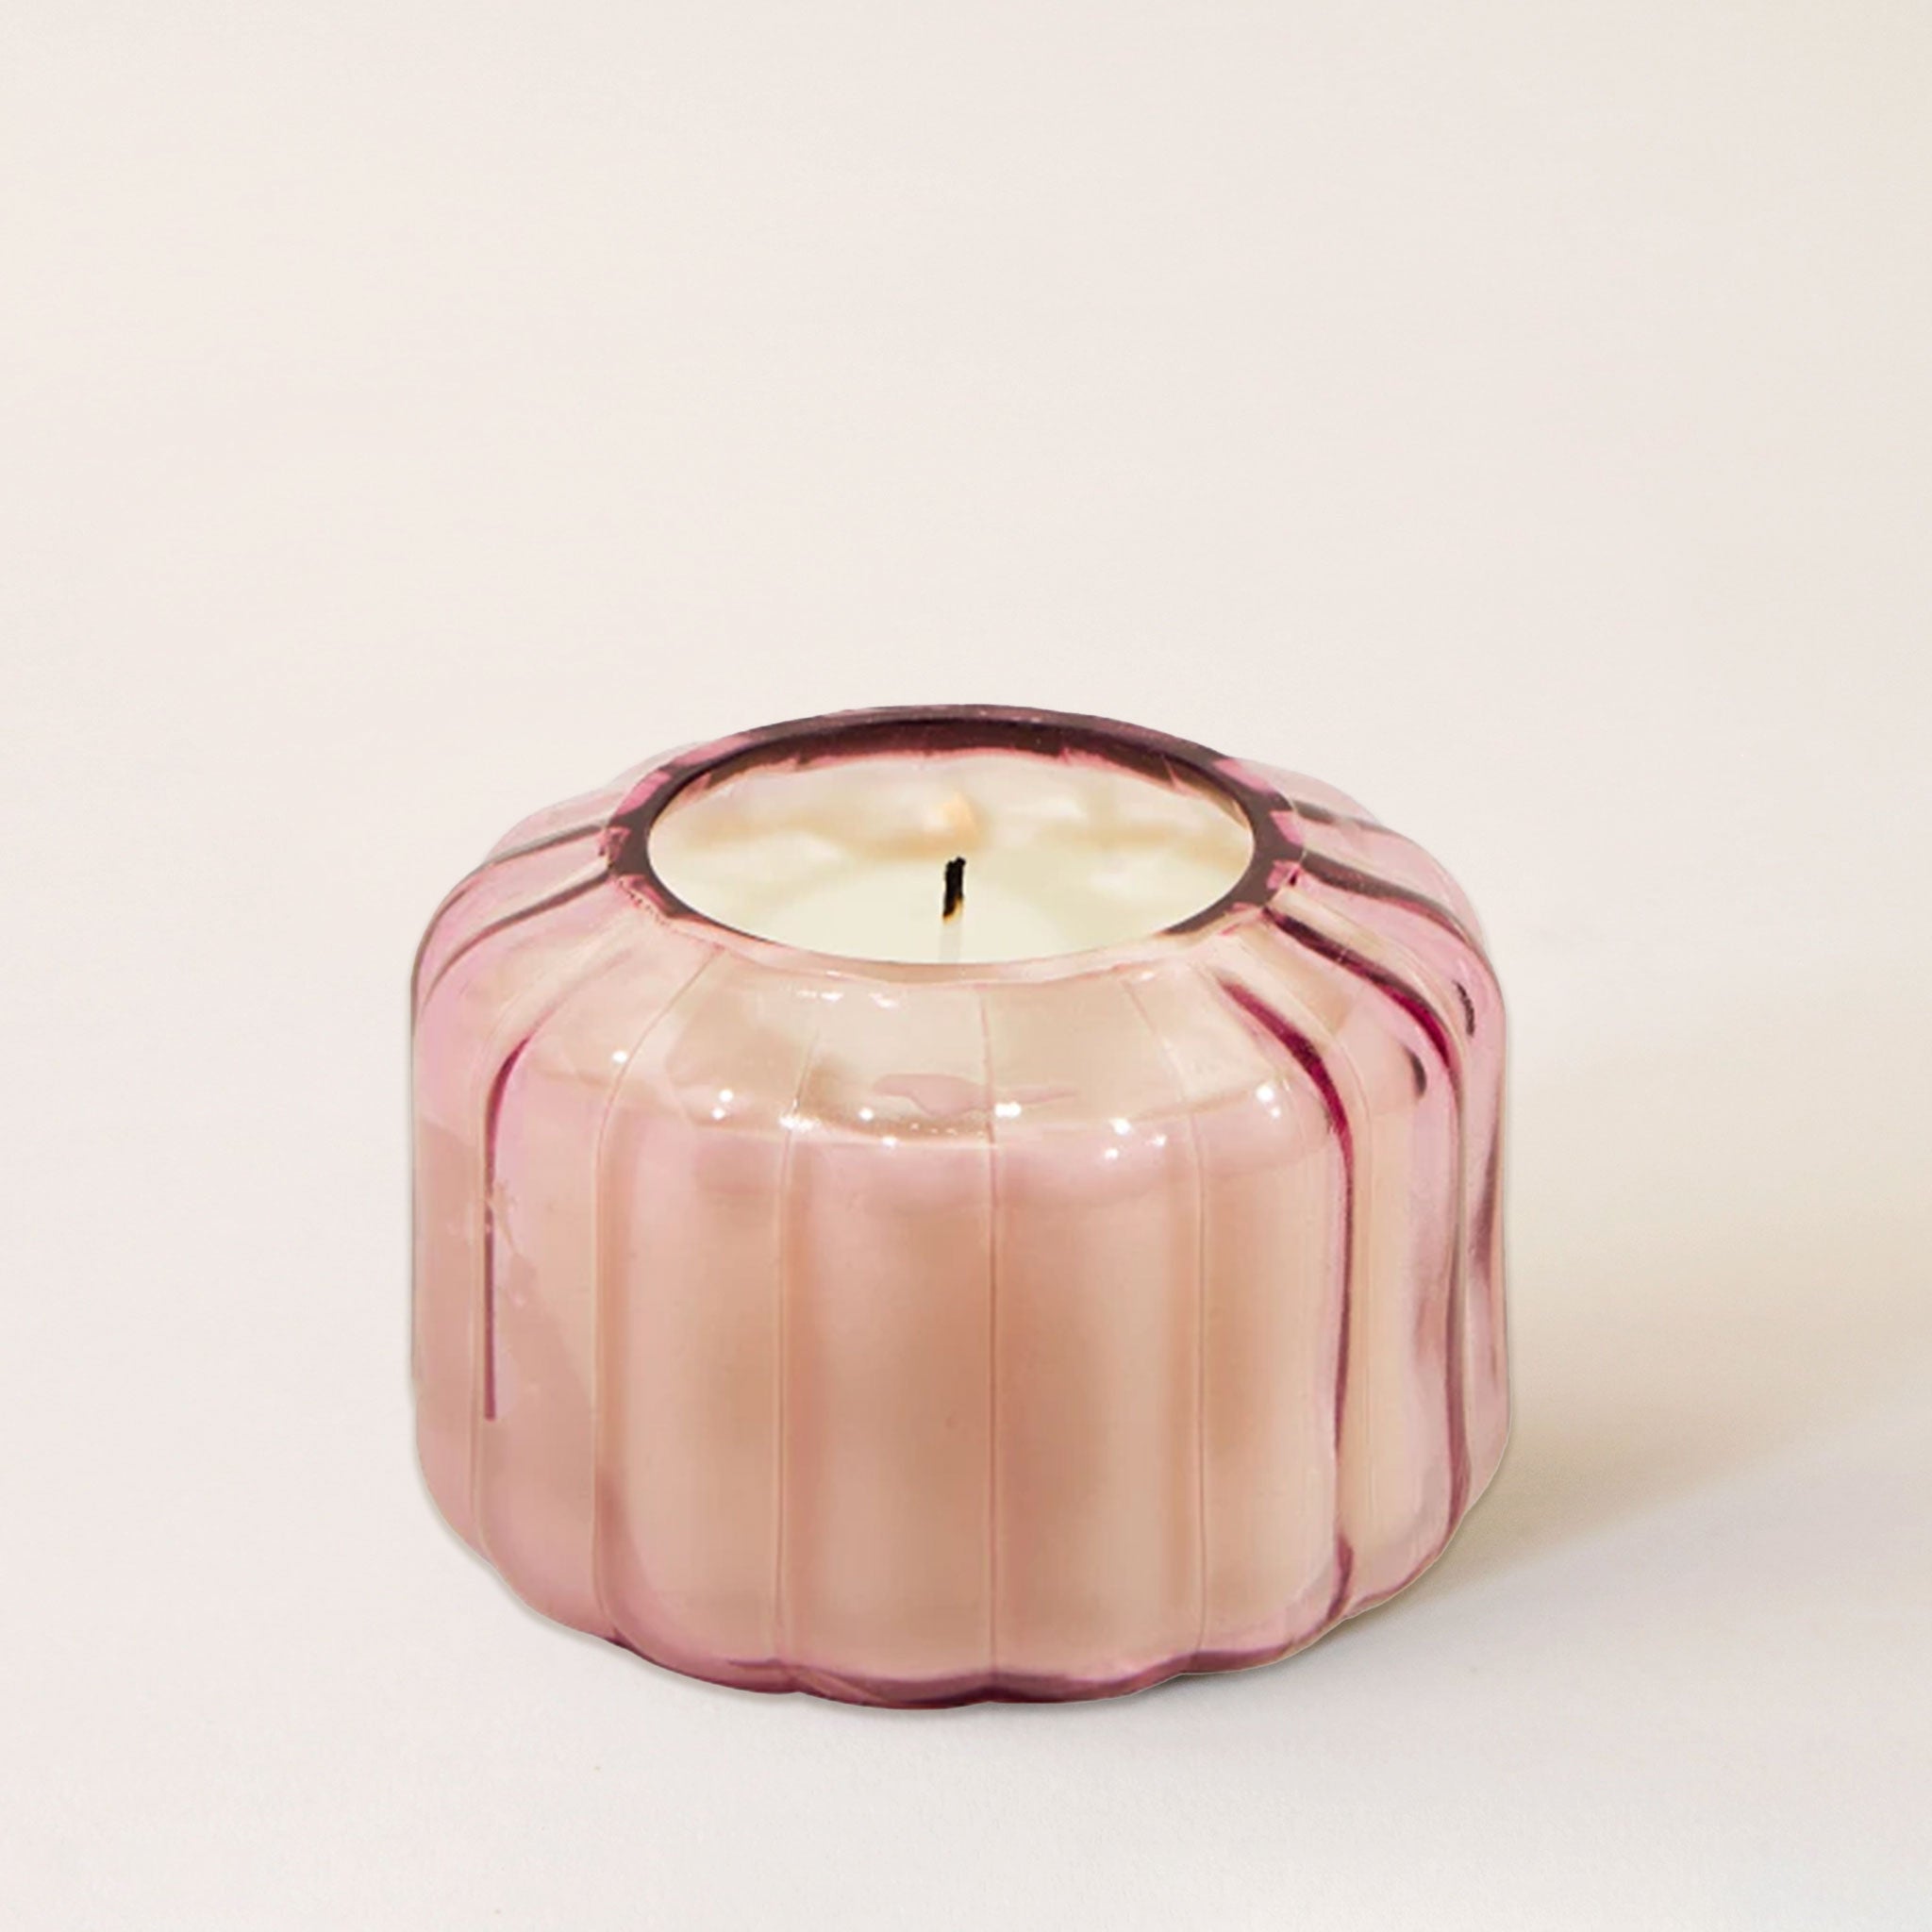 On a white background is a pink glass candle with a ribbed texture and a single wick.